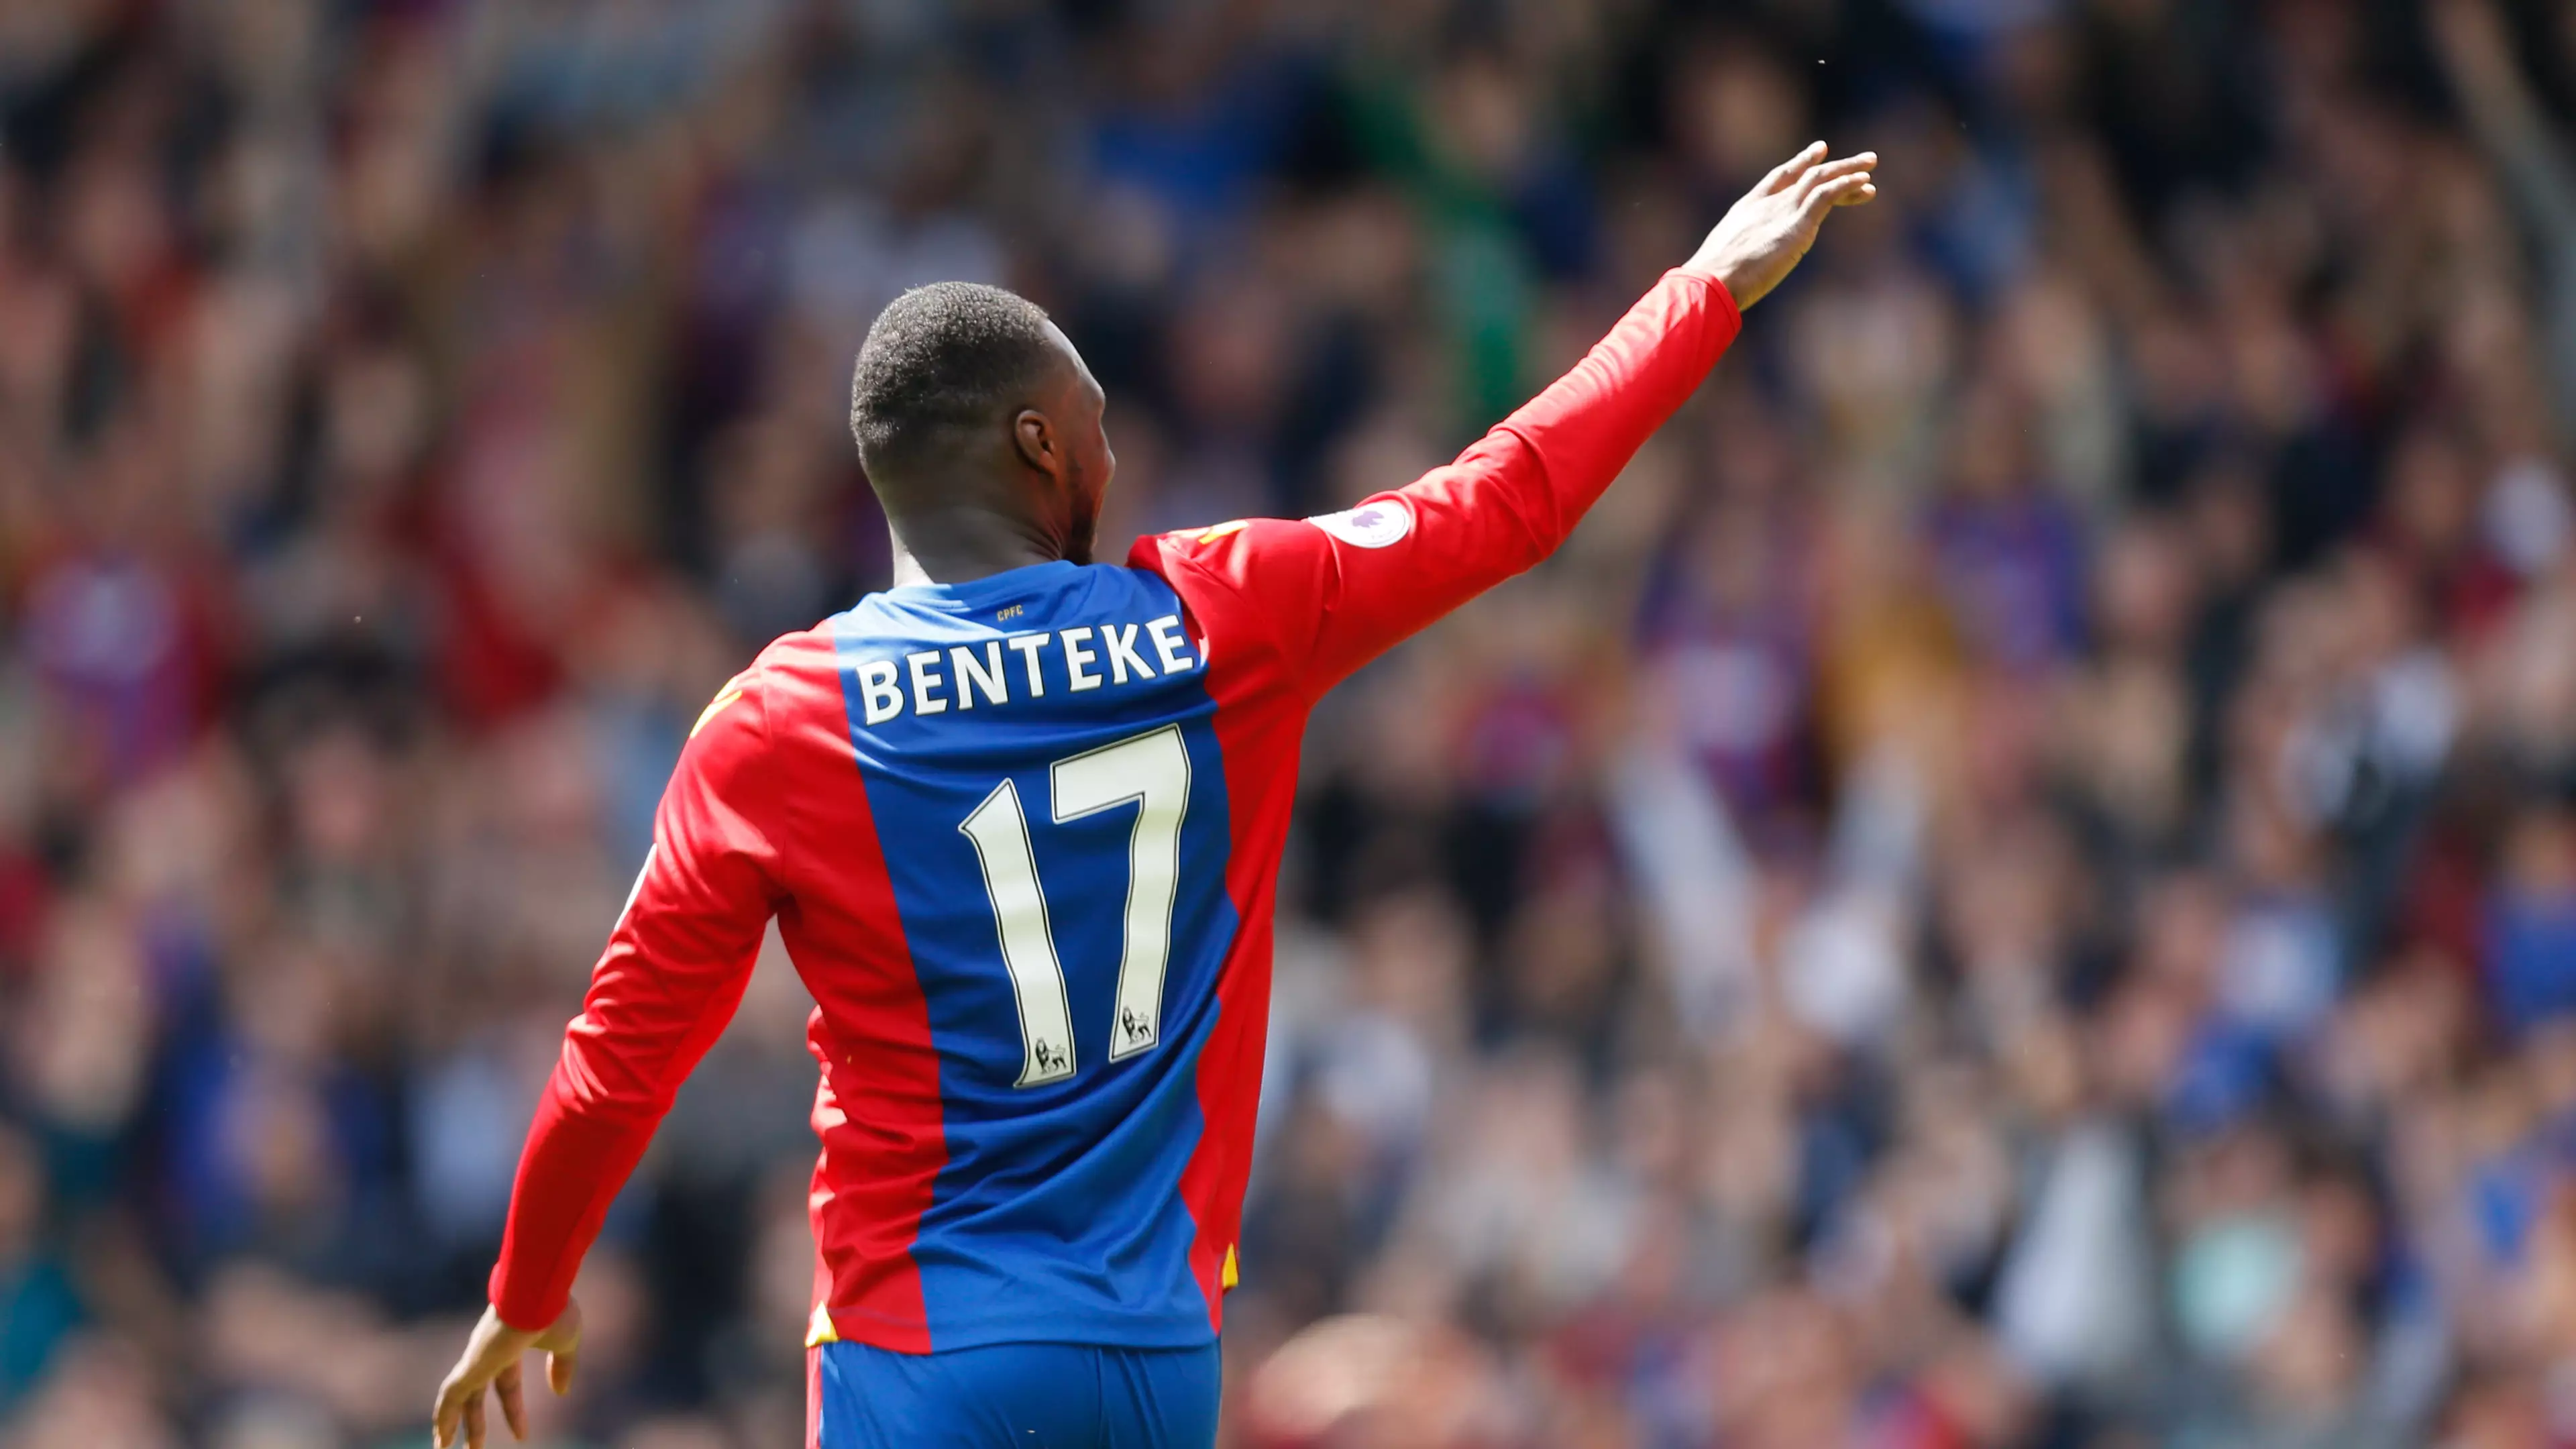 Christian Benteke Does His Best Victor Anichebe Impression With Twitter Gaffe